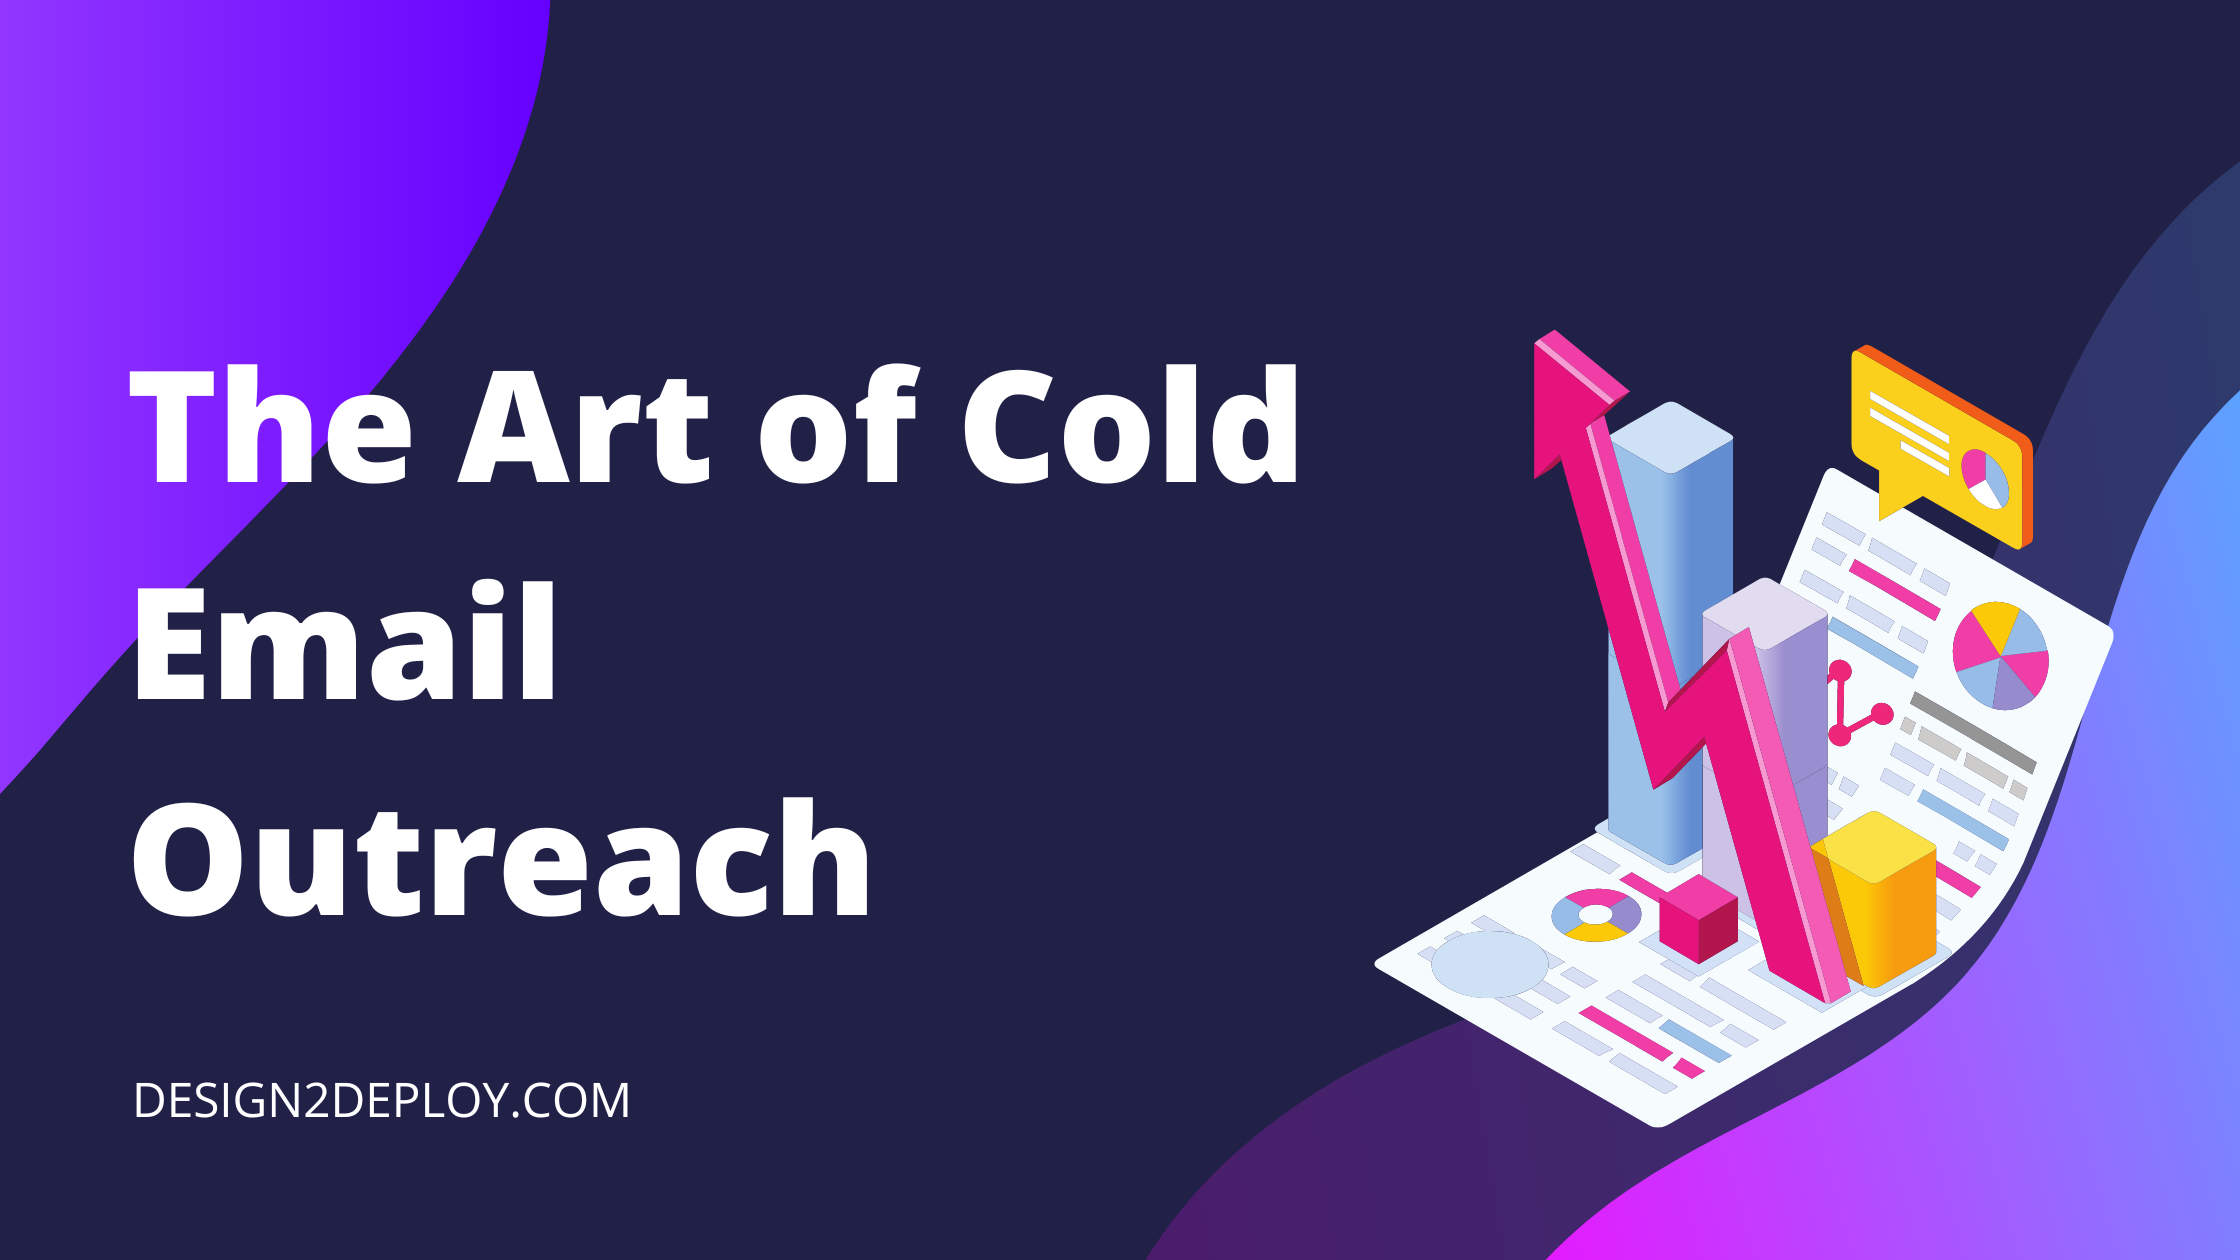 The Art of Cold Email Outreach